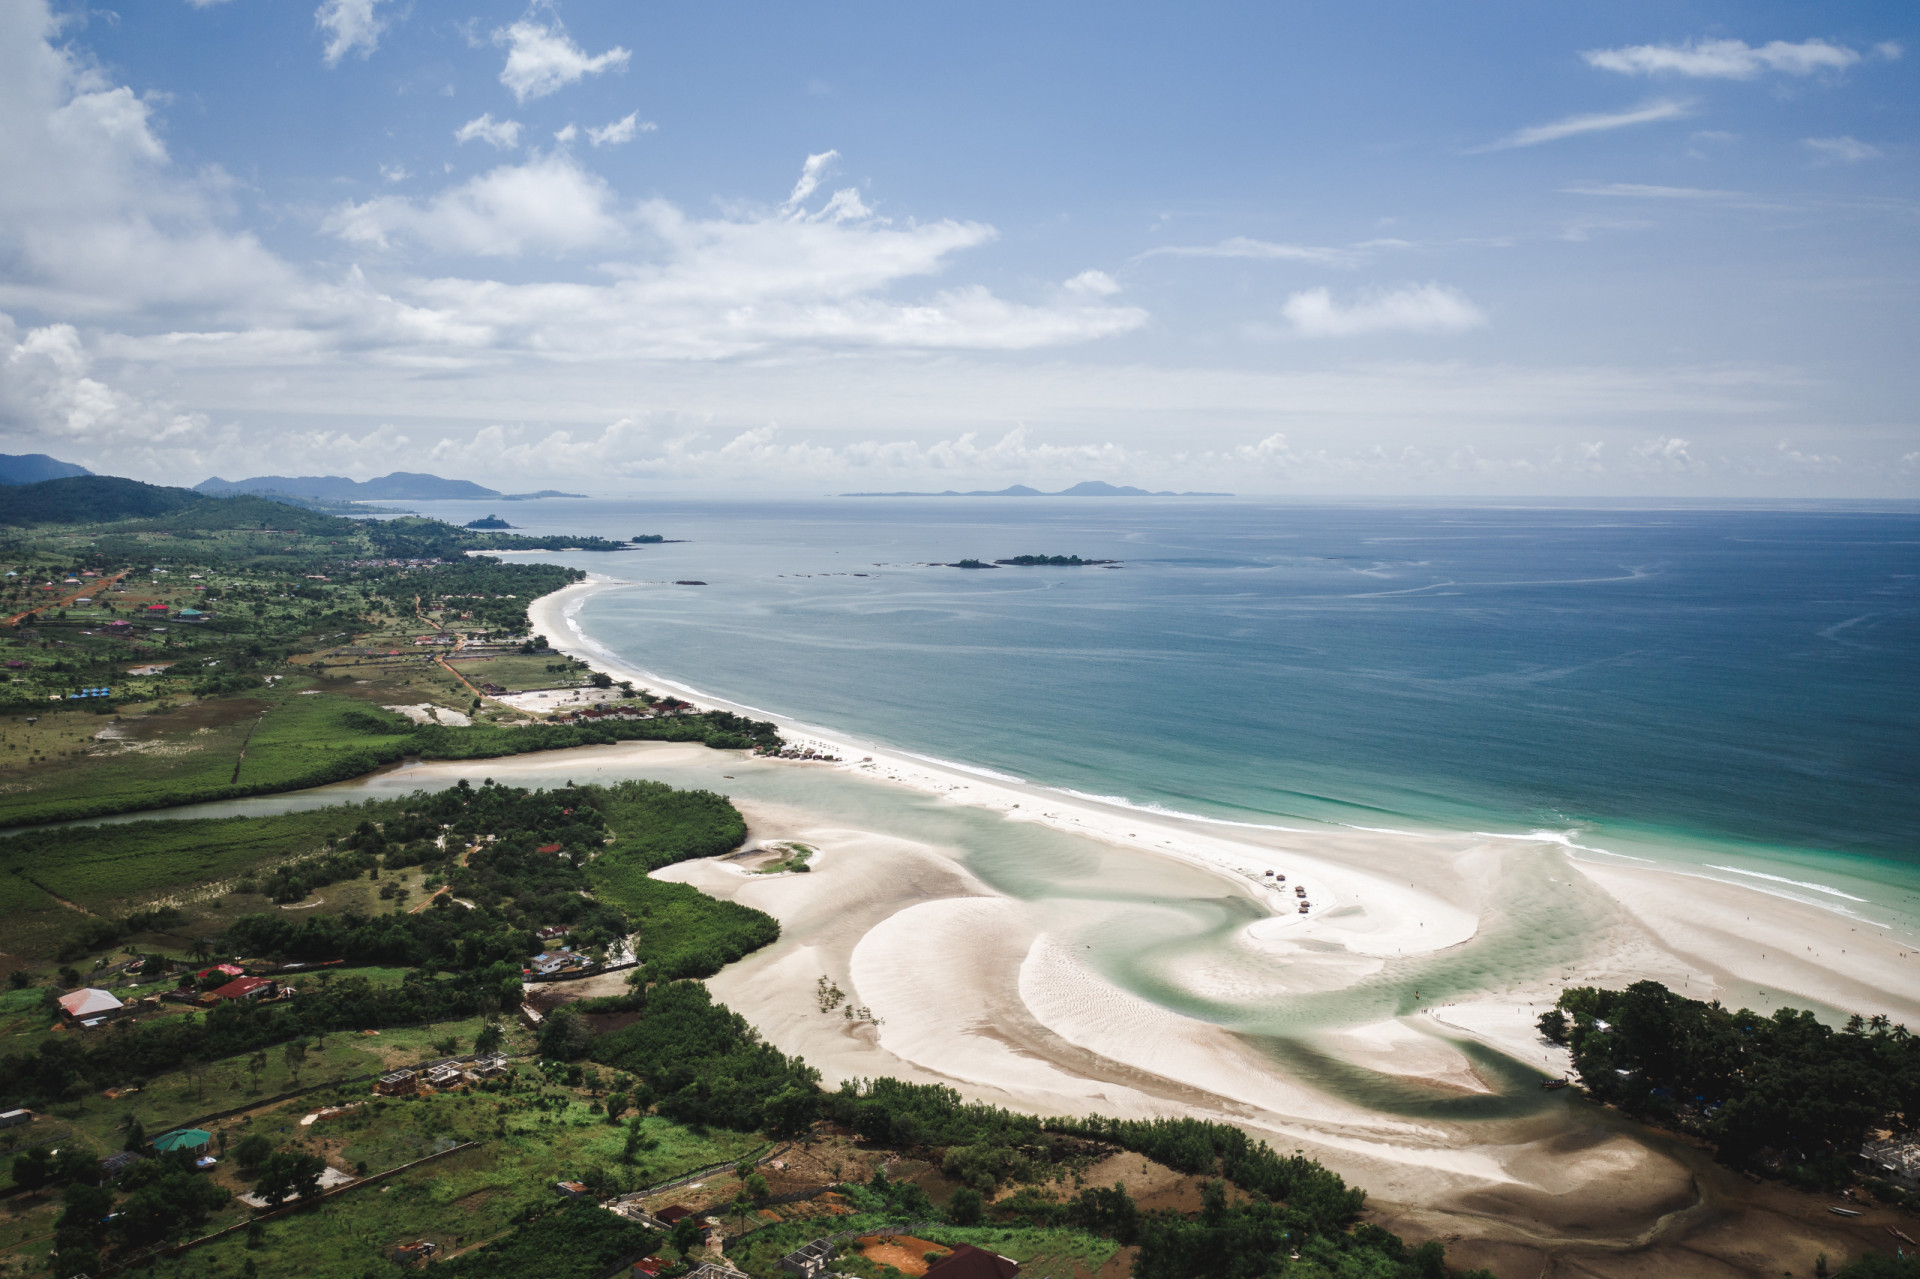 <p>Wide sandy beaches and a mountainous plateau make Sierra Leone one of the top places to visit this year. The country is more accessible than ever before thanks to its recently-refurbished international airport, and the capital city’s long-held history of African culture is truly a wonder to behold.</p><p>You may also like:<a href="https://www.starsinsider.com/n/412743?utm_source=msn.com&utm_medium=display&utm_campaign=referral_description&utm_content=701834en-us"> 100 of the famous faces who've passed away in 2019</a></p>